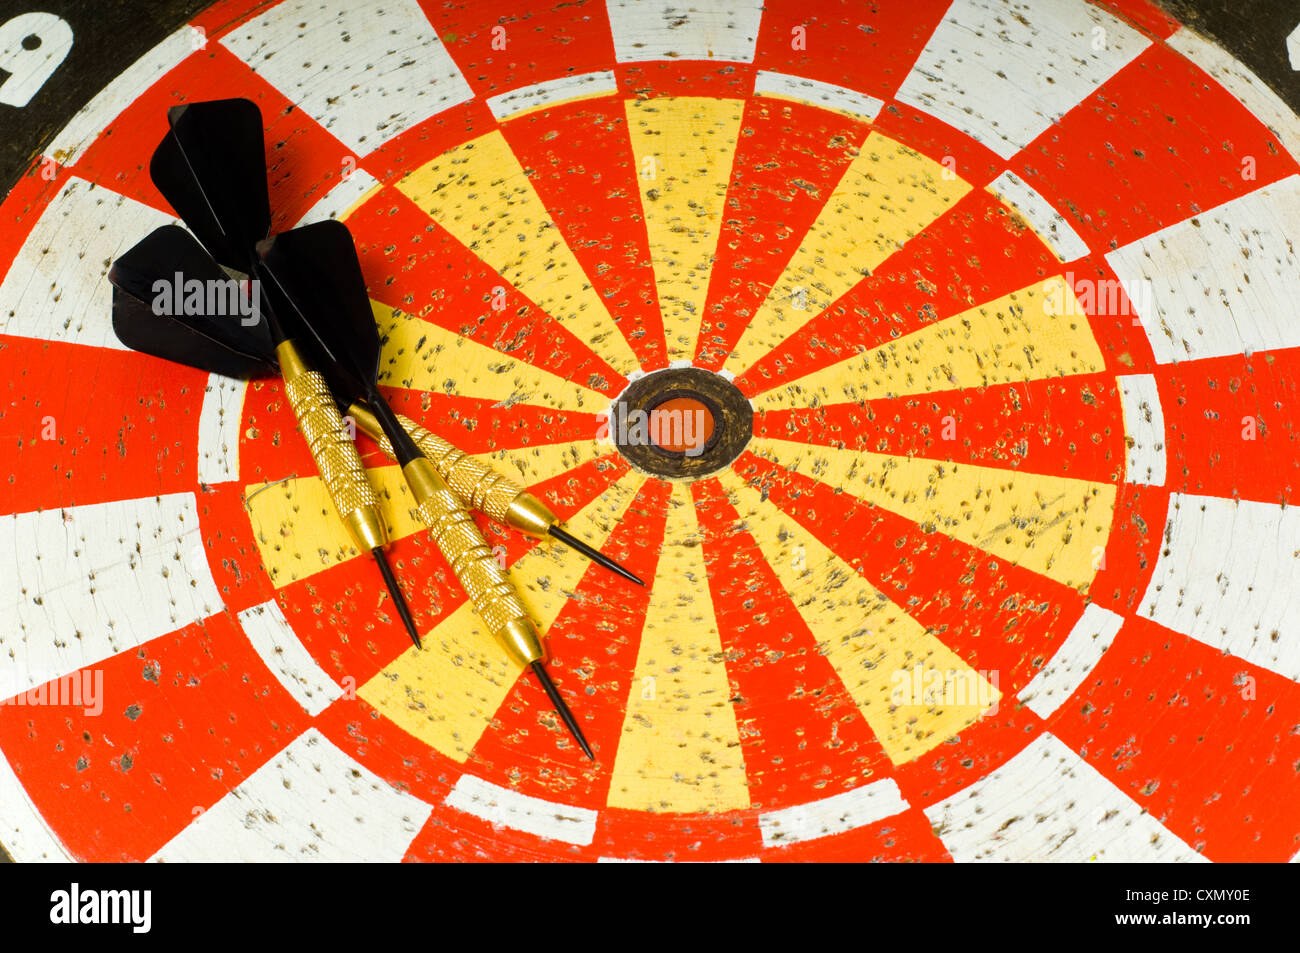 Dartboard with several darts lying on top of board Stock Photo